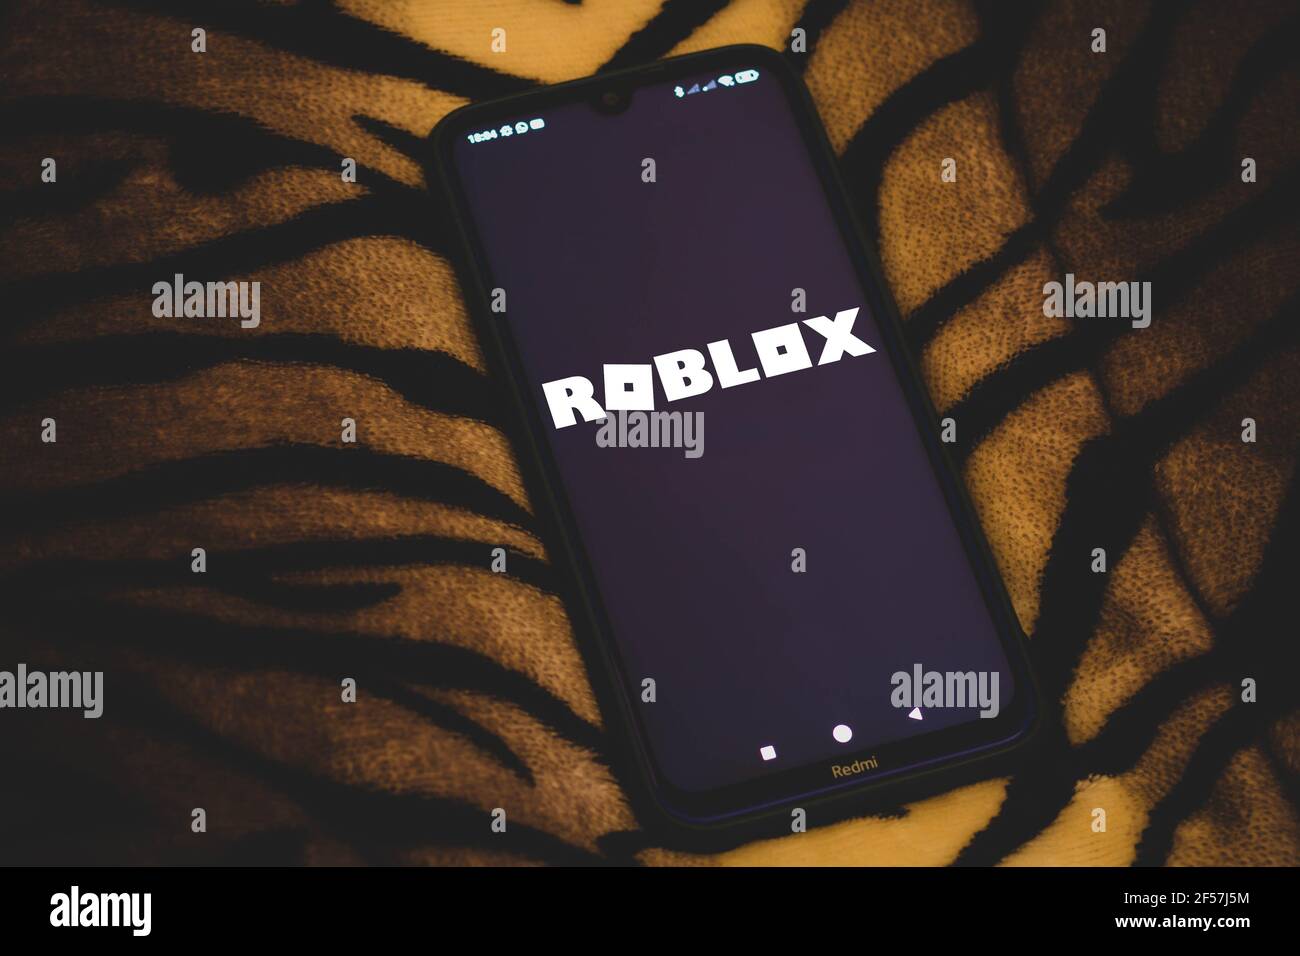 Roblox game app on the smartphone screen on blue background. Top view. Rio  de Janeiro, RJ, Brazil. June 2021. Stock Photo